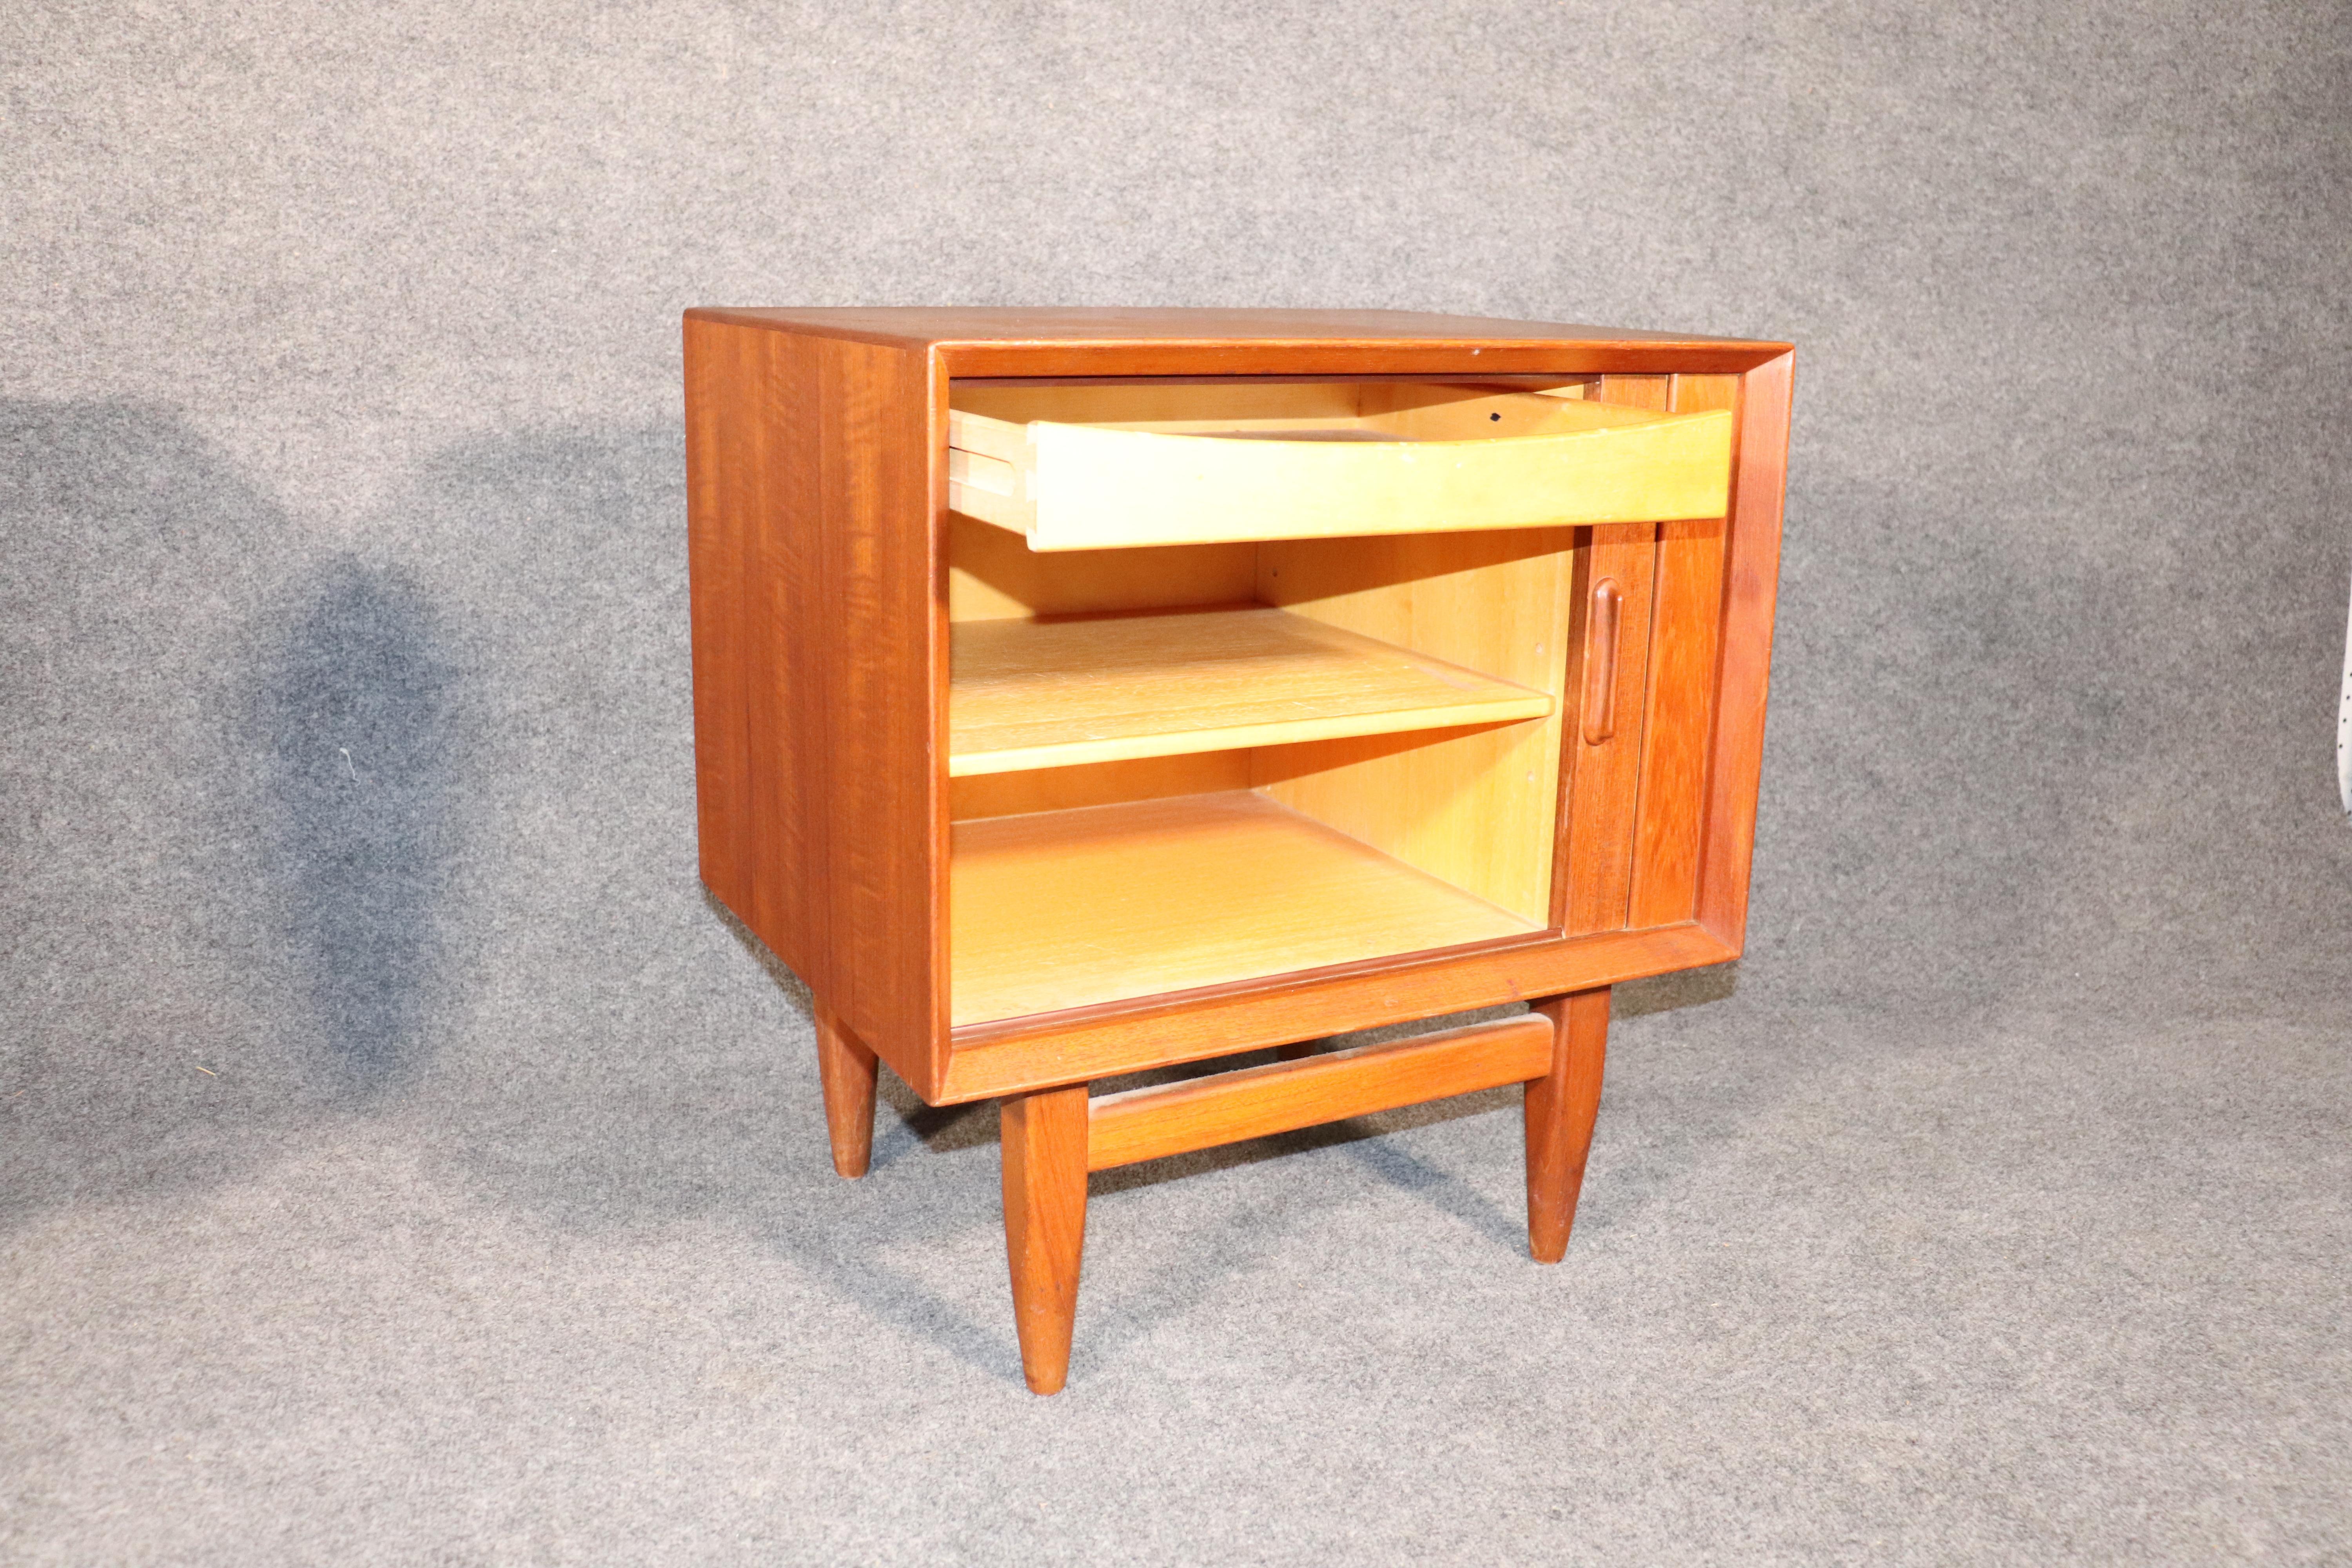 Pair of Mid-Century Modern end tables with tambour doors that recede behind the cabinet. Simple Danish design with storage for living room or bedroom.
Please confirm location.